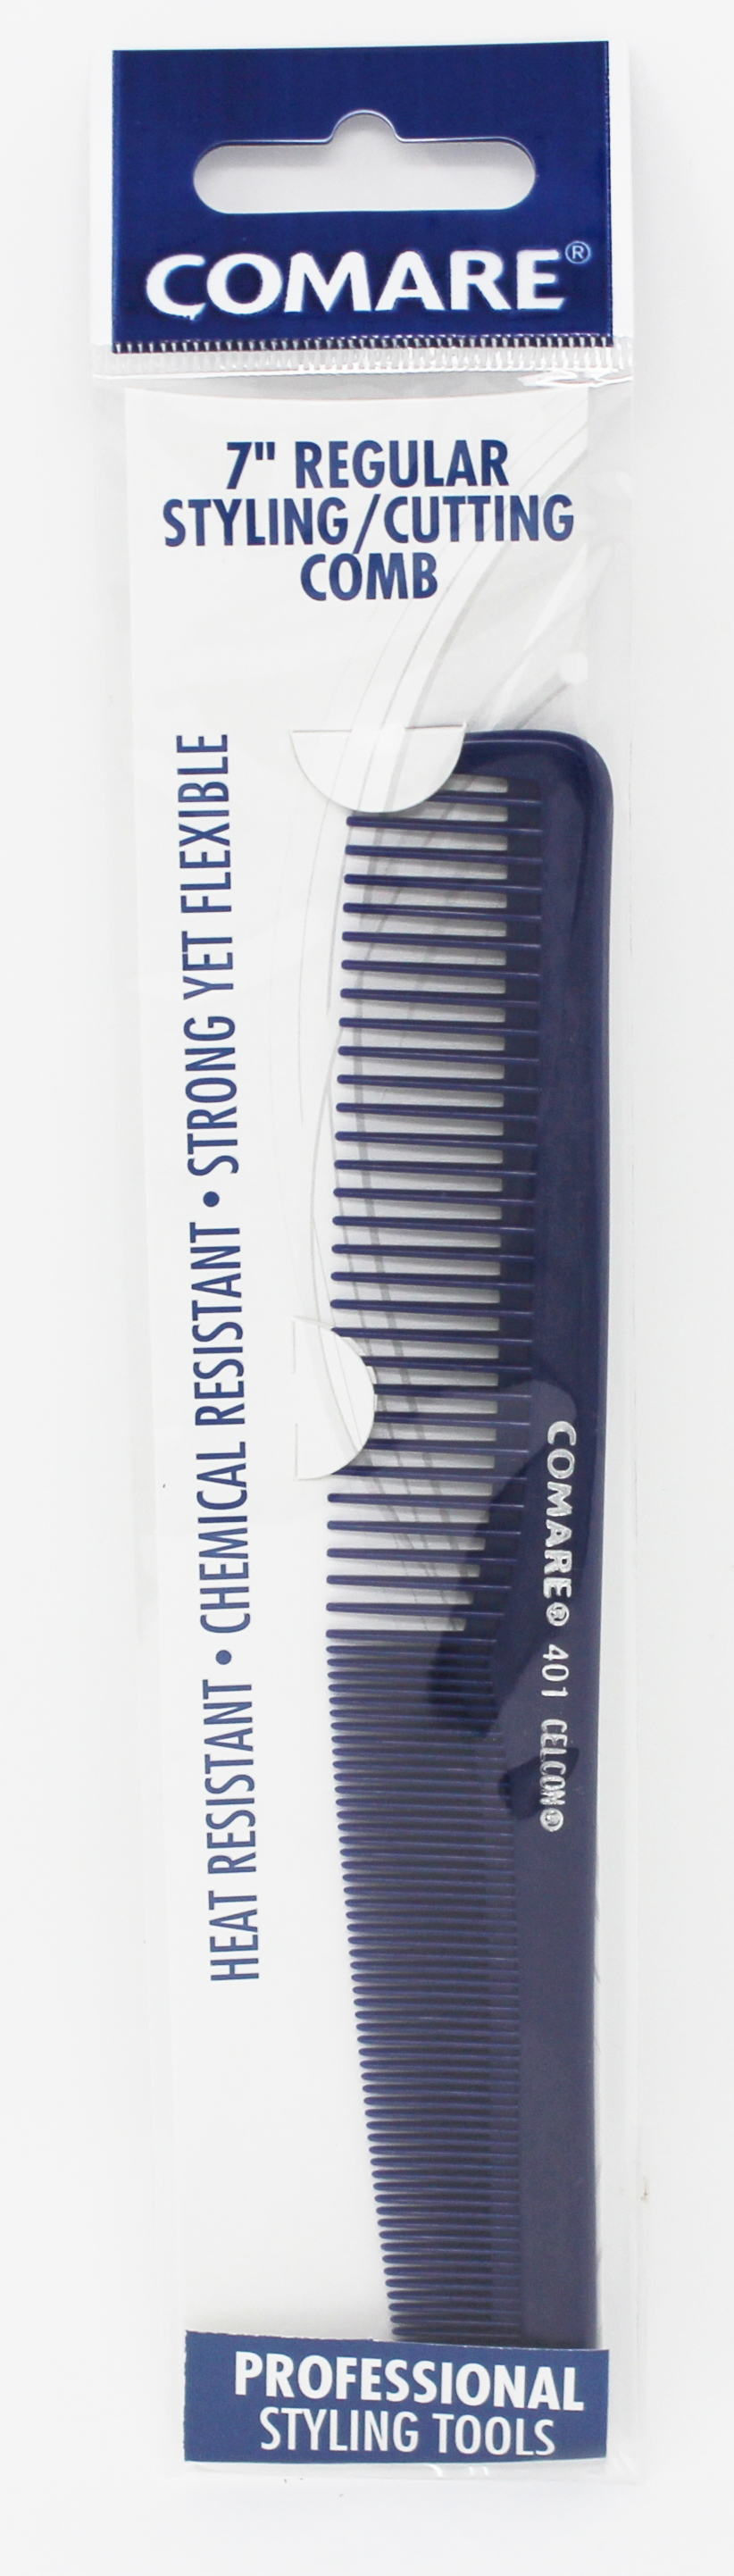 Comare 7" inch regular styling comb